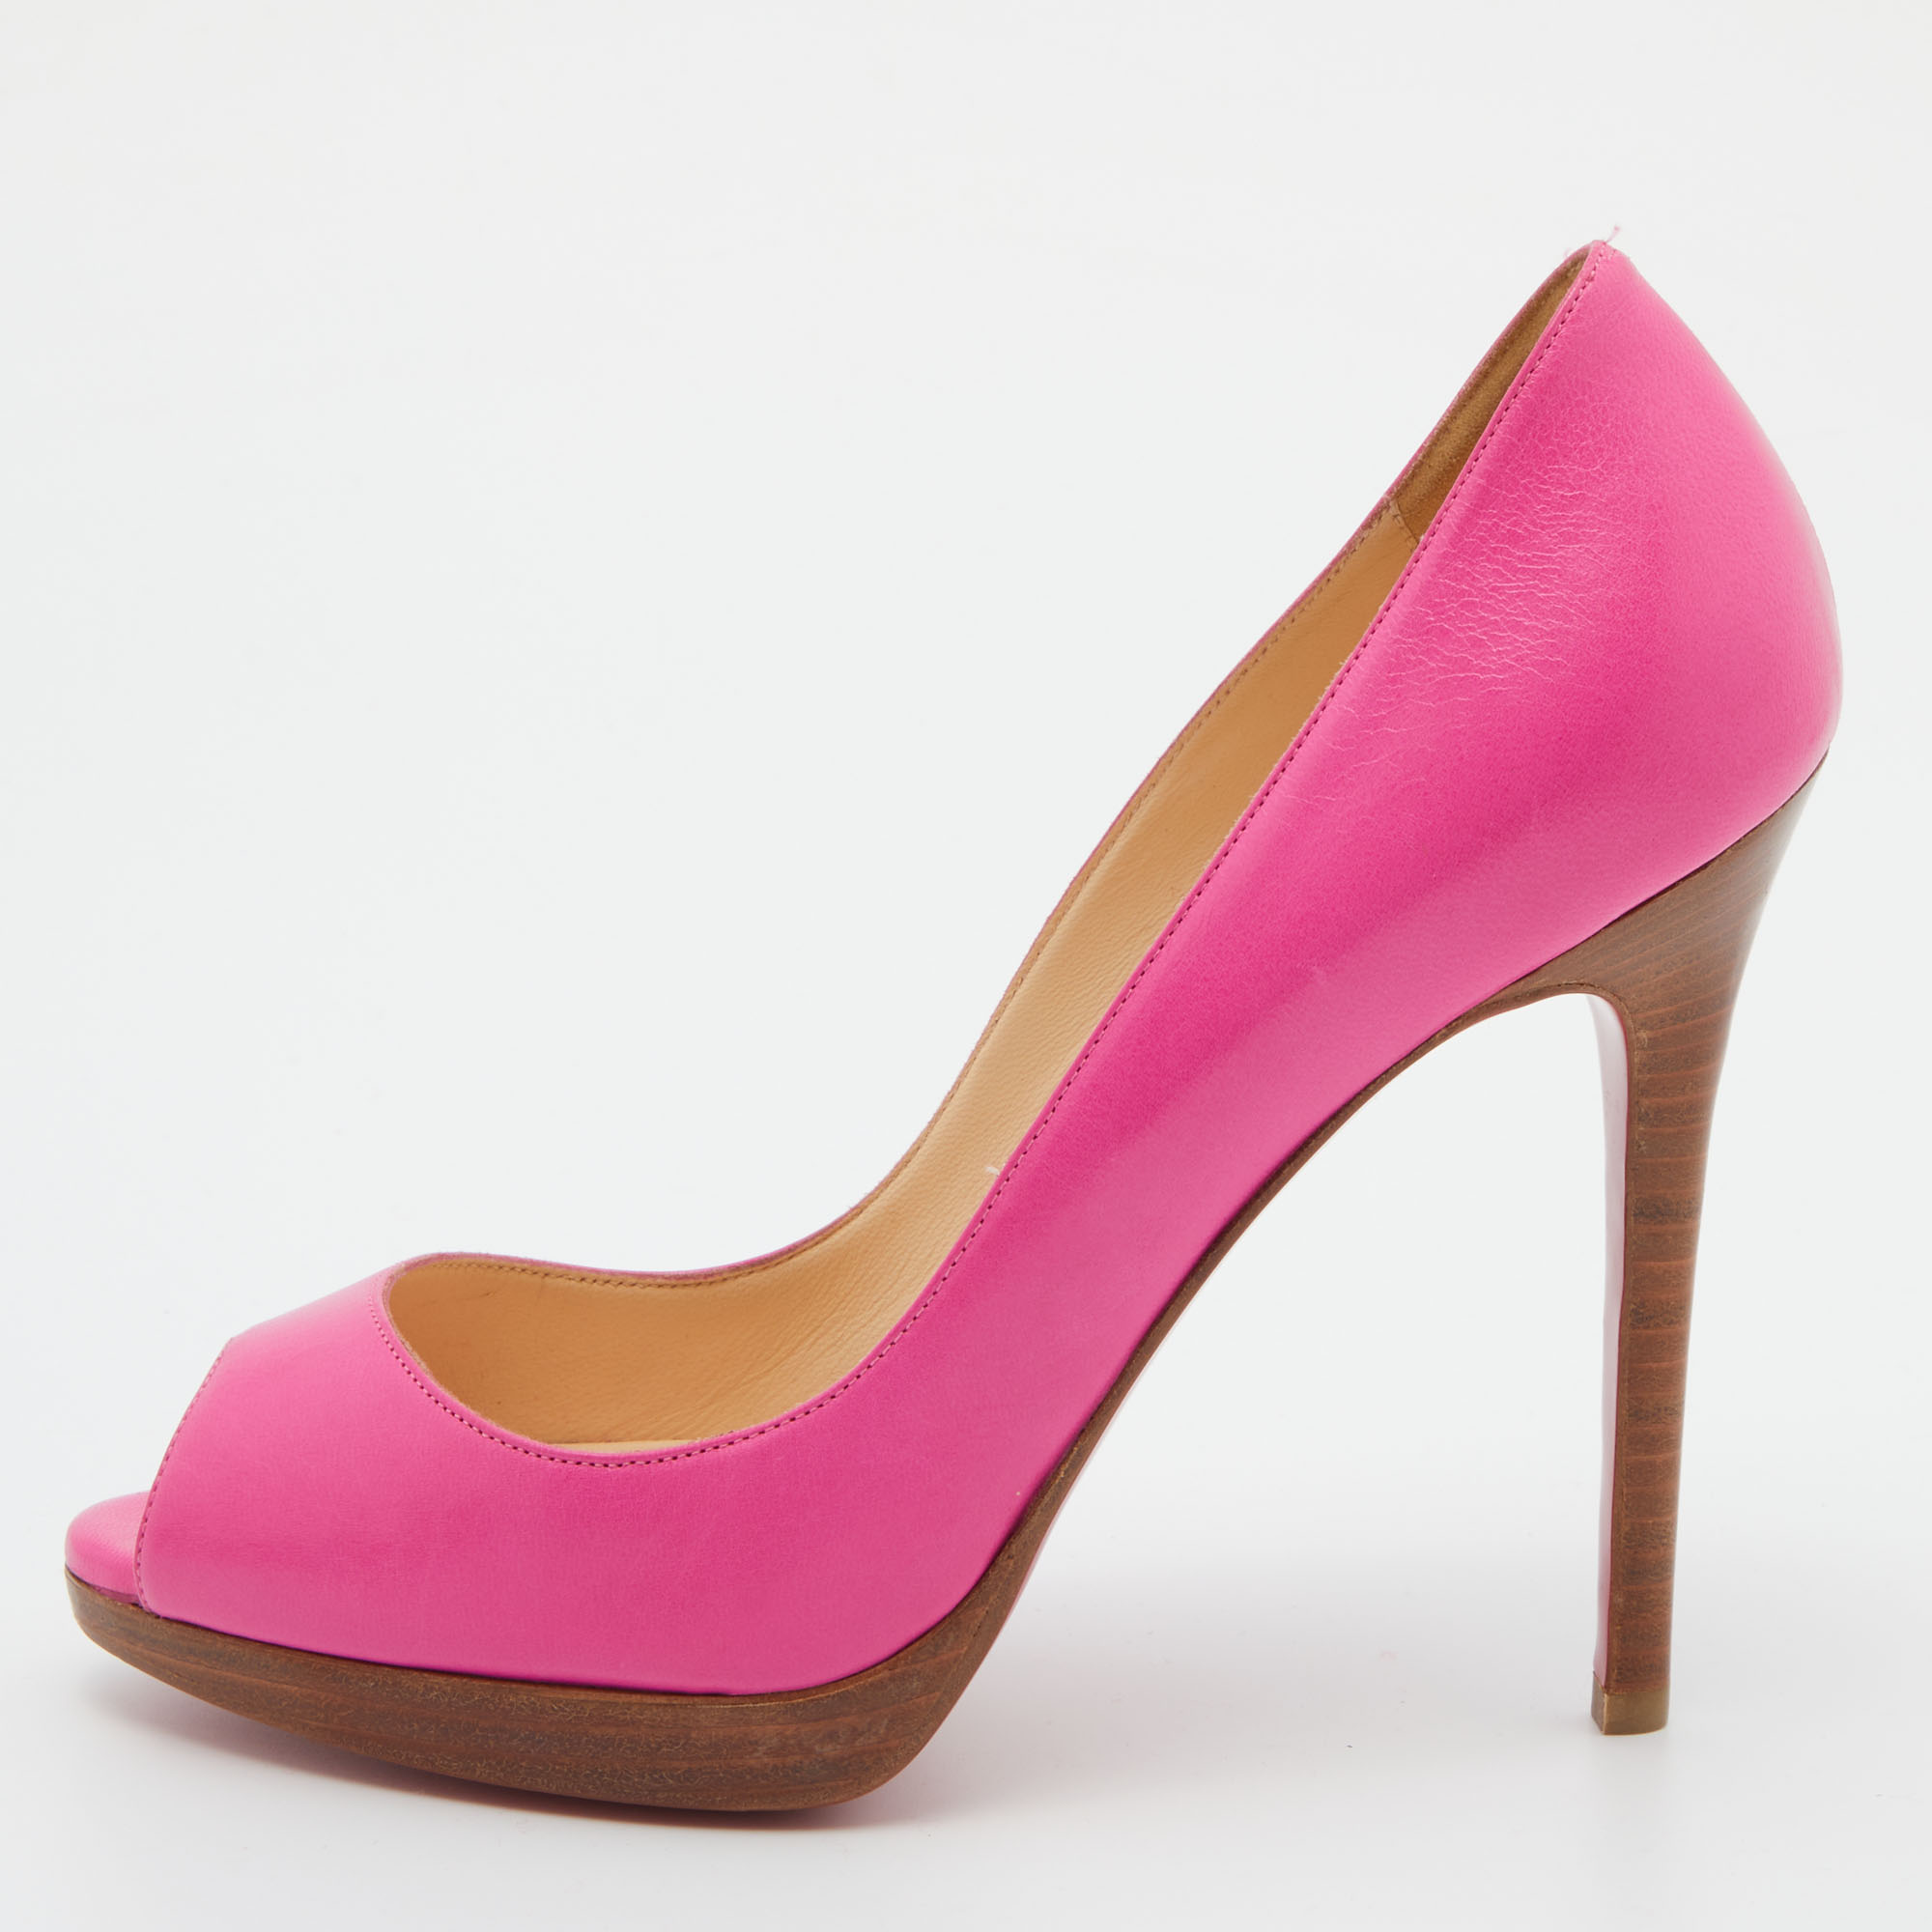 Pre-owned Christian Louboutin Pink Leather Peep Toe Platform Pumps Size 37